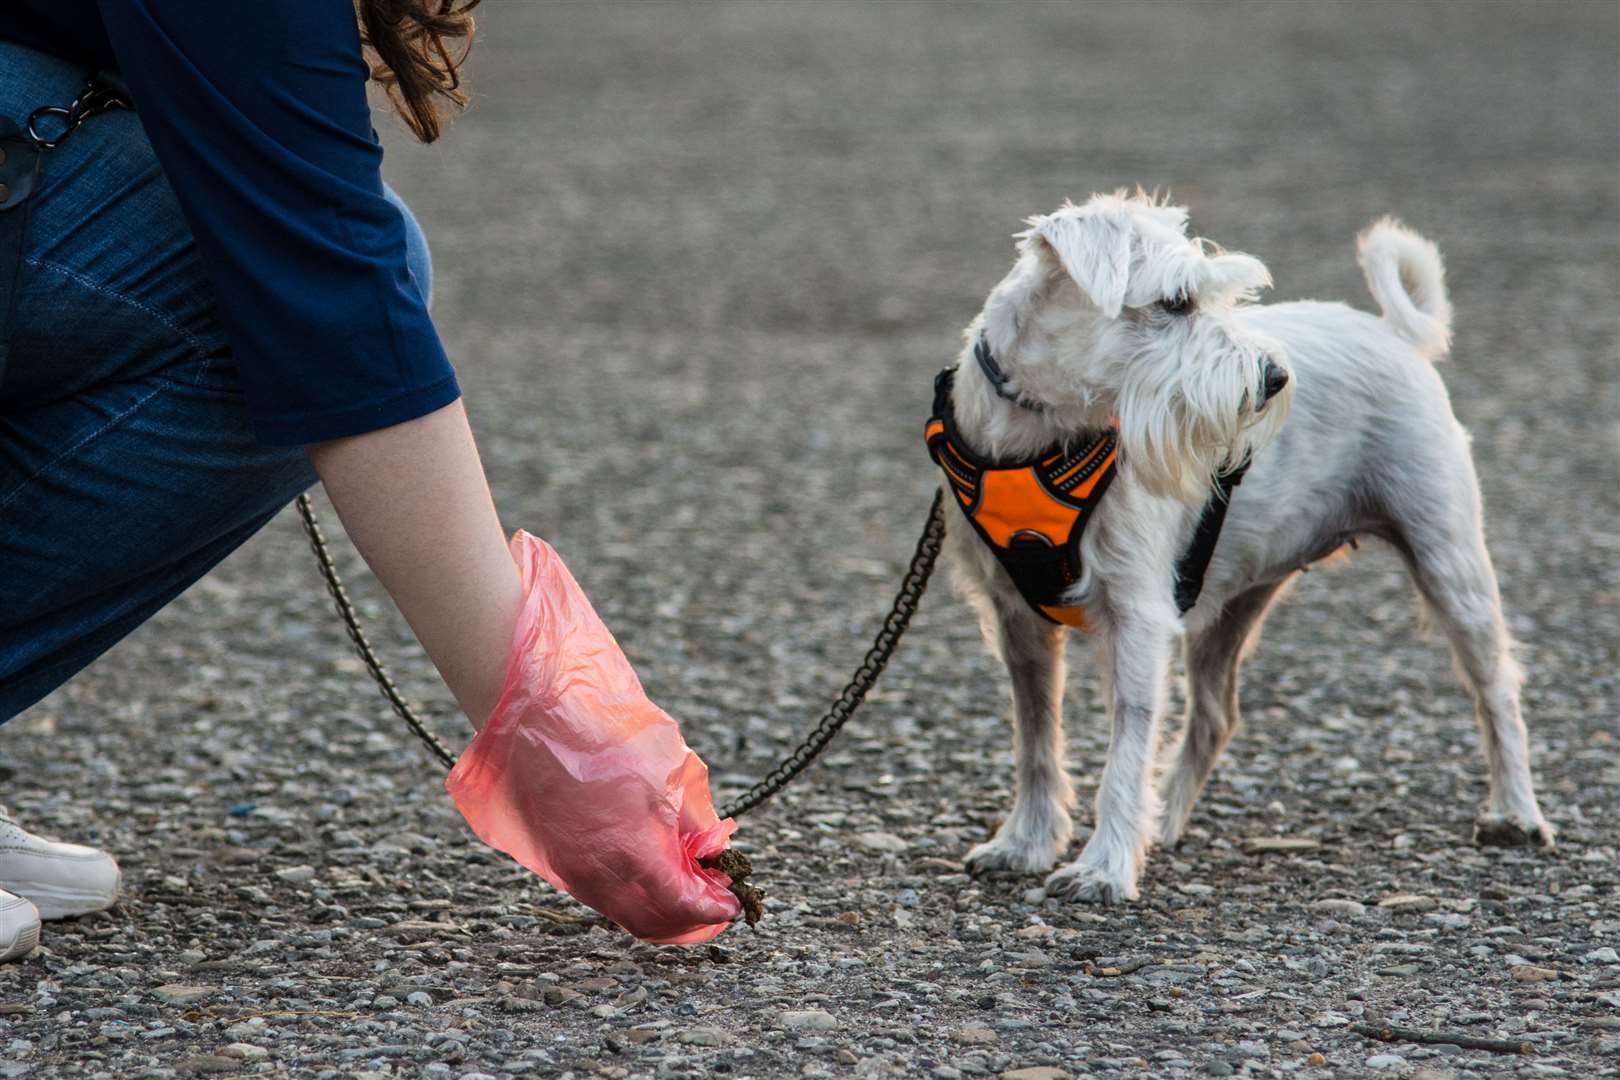 A dog's poo may have blood in it for many reasons. Photo: istock/Radule Perisic